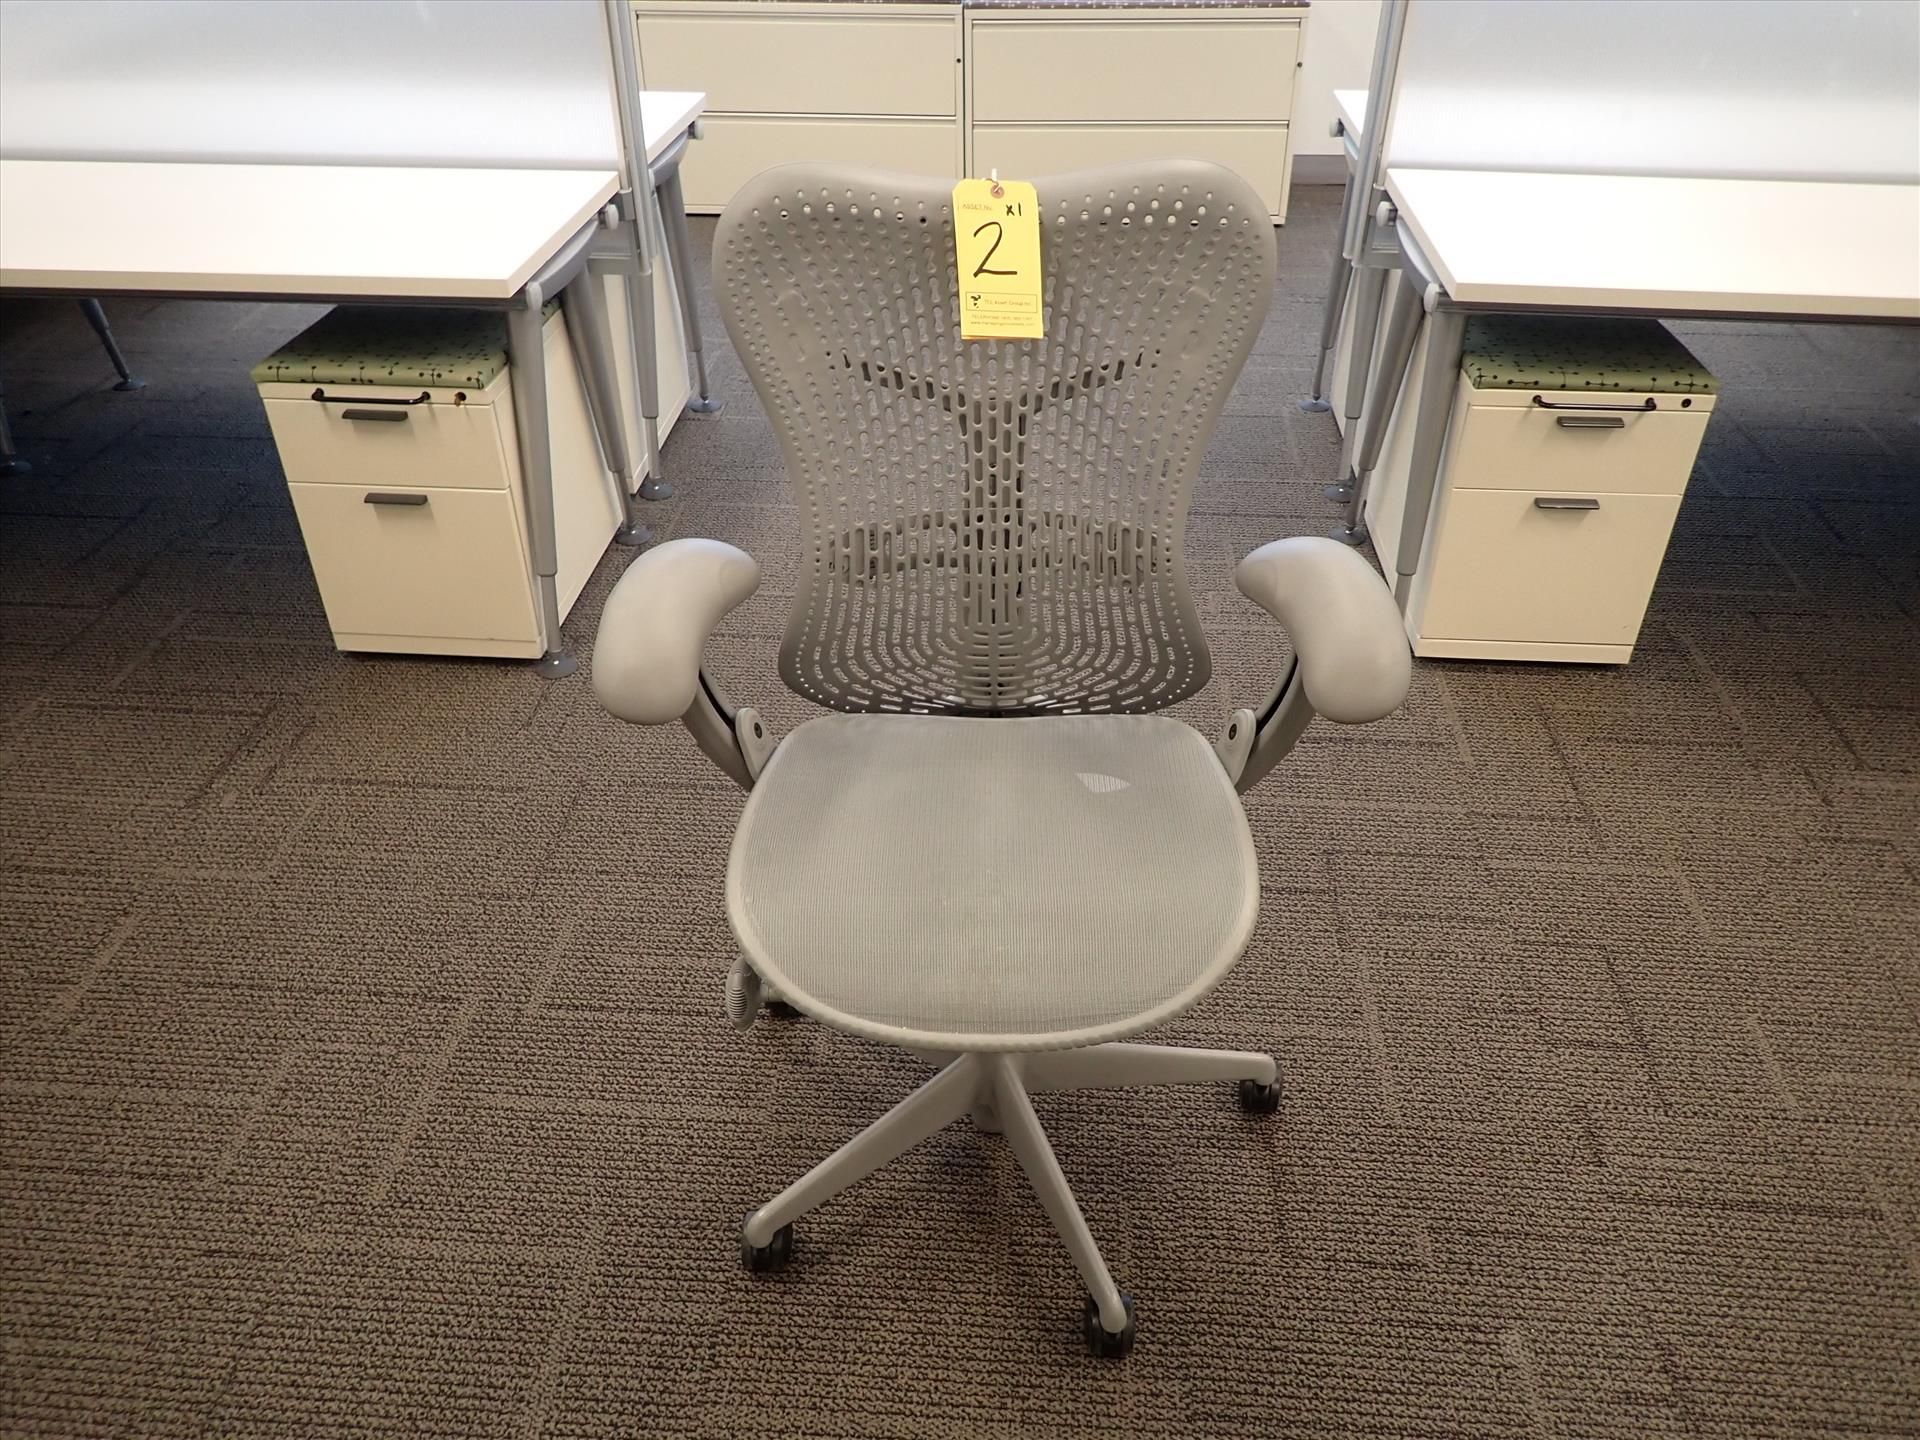 Herman Miller Mirra task chair; adjustable height, arms, lumbar support, tilt seat and back, swivel,